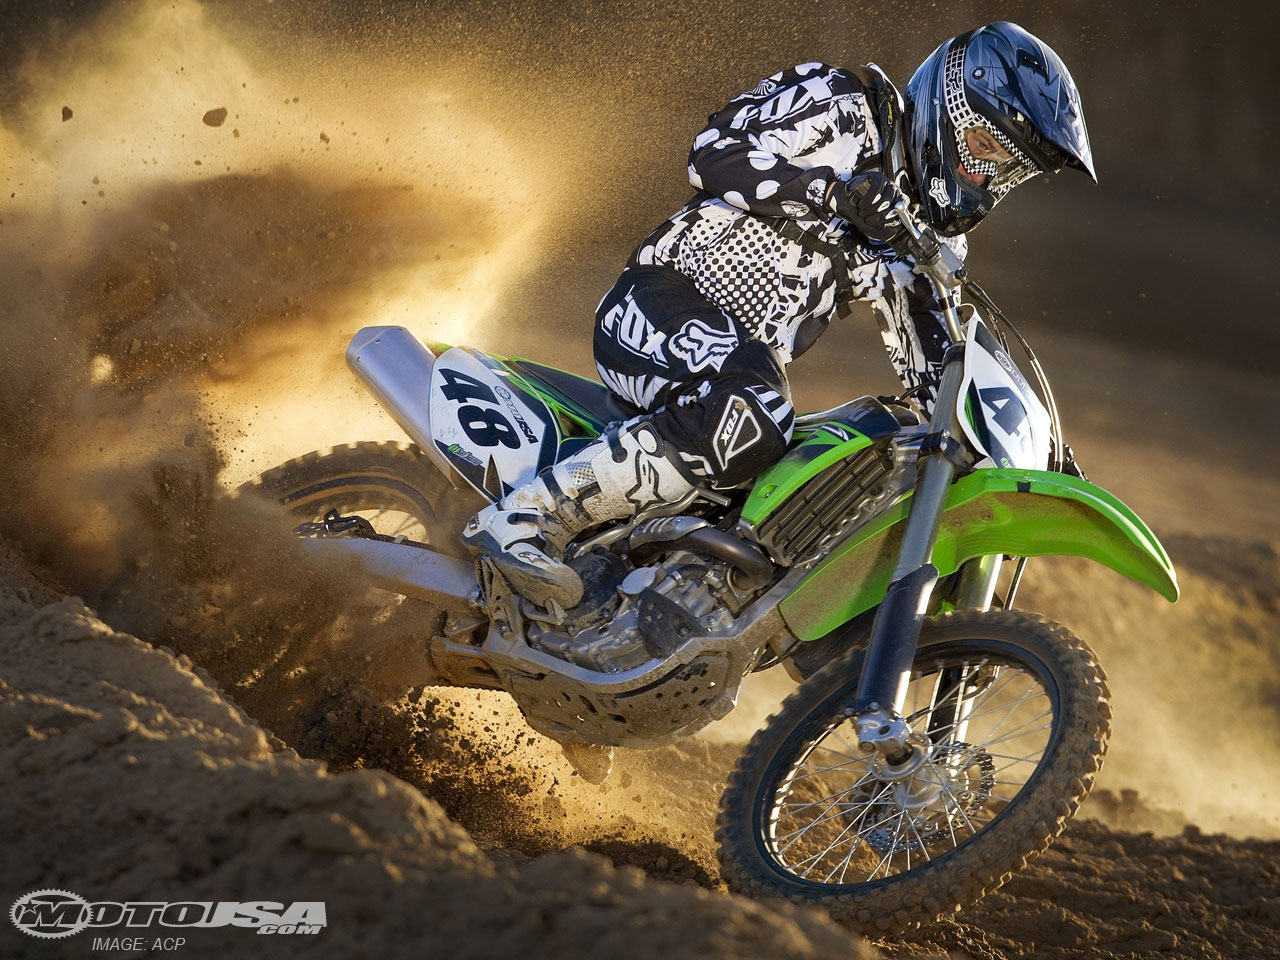 Download High quality Motocross wallpaper / Sports / 1280x960